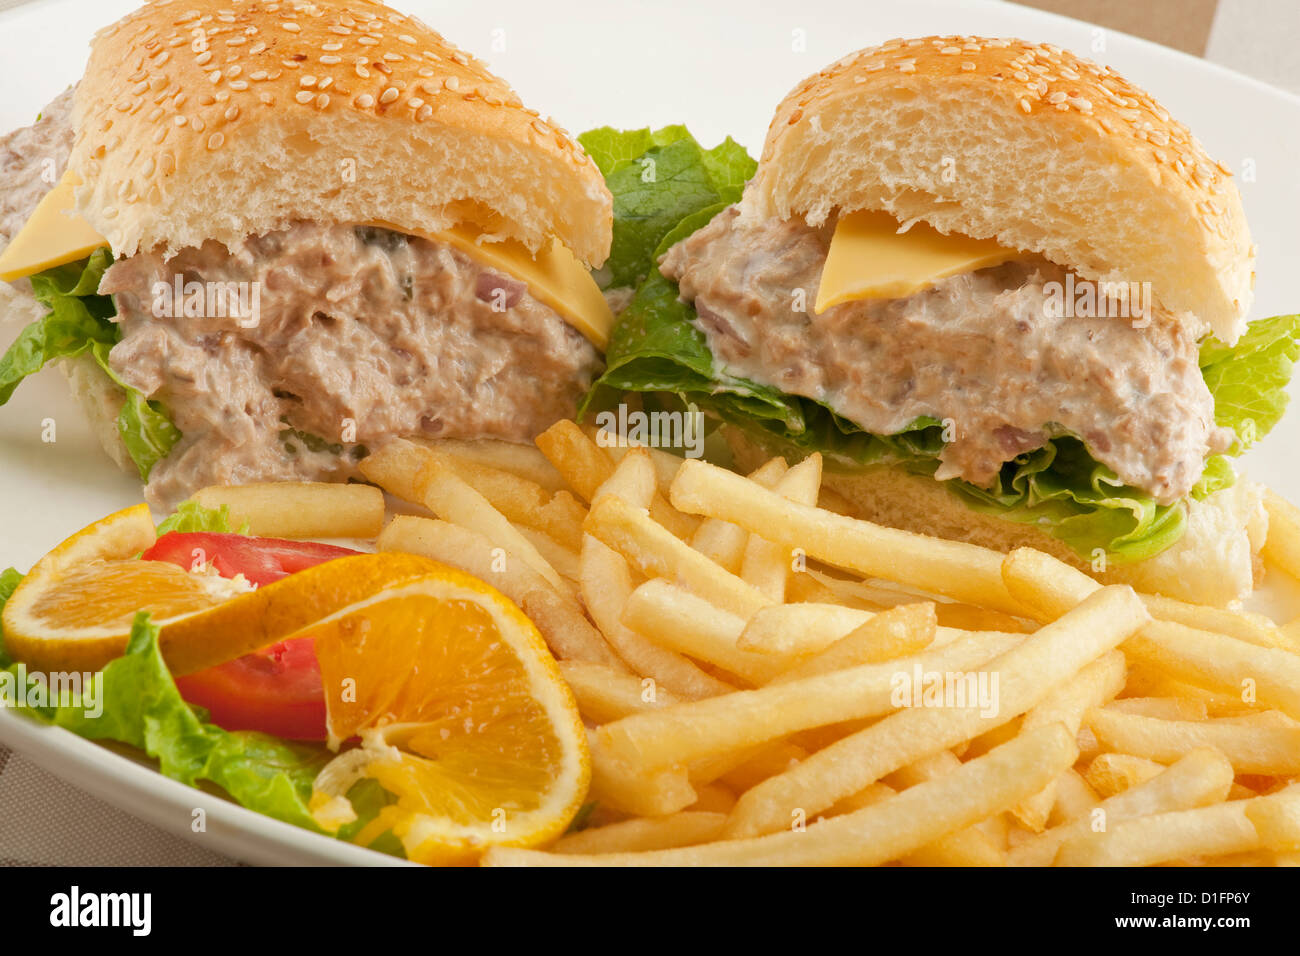 A delicious tuna salad sandwich with french fries Stock Photo